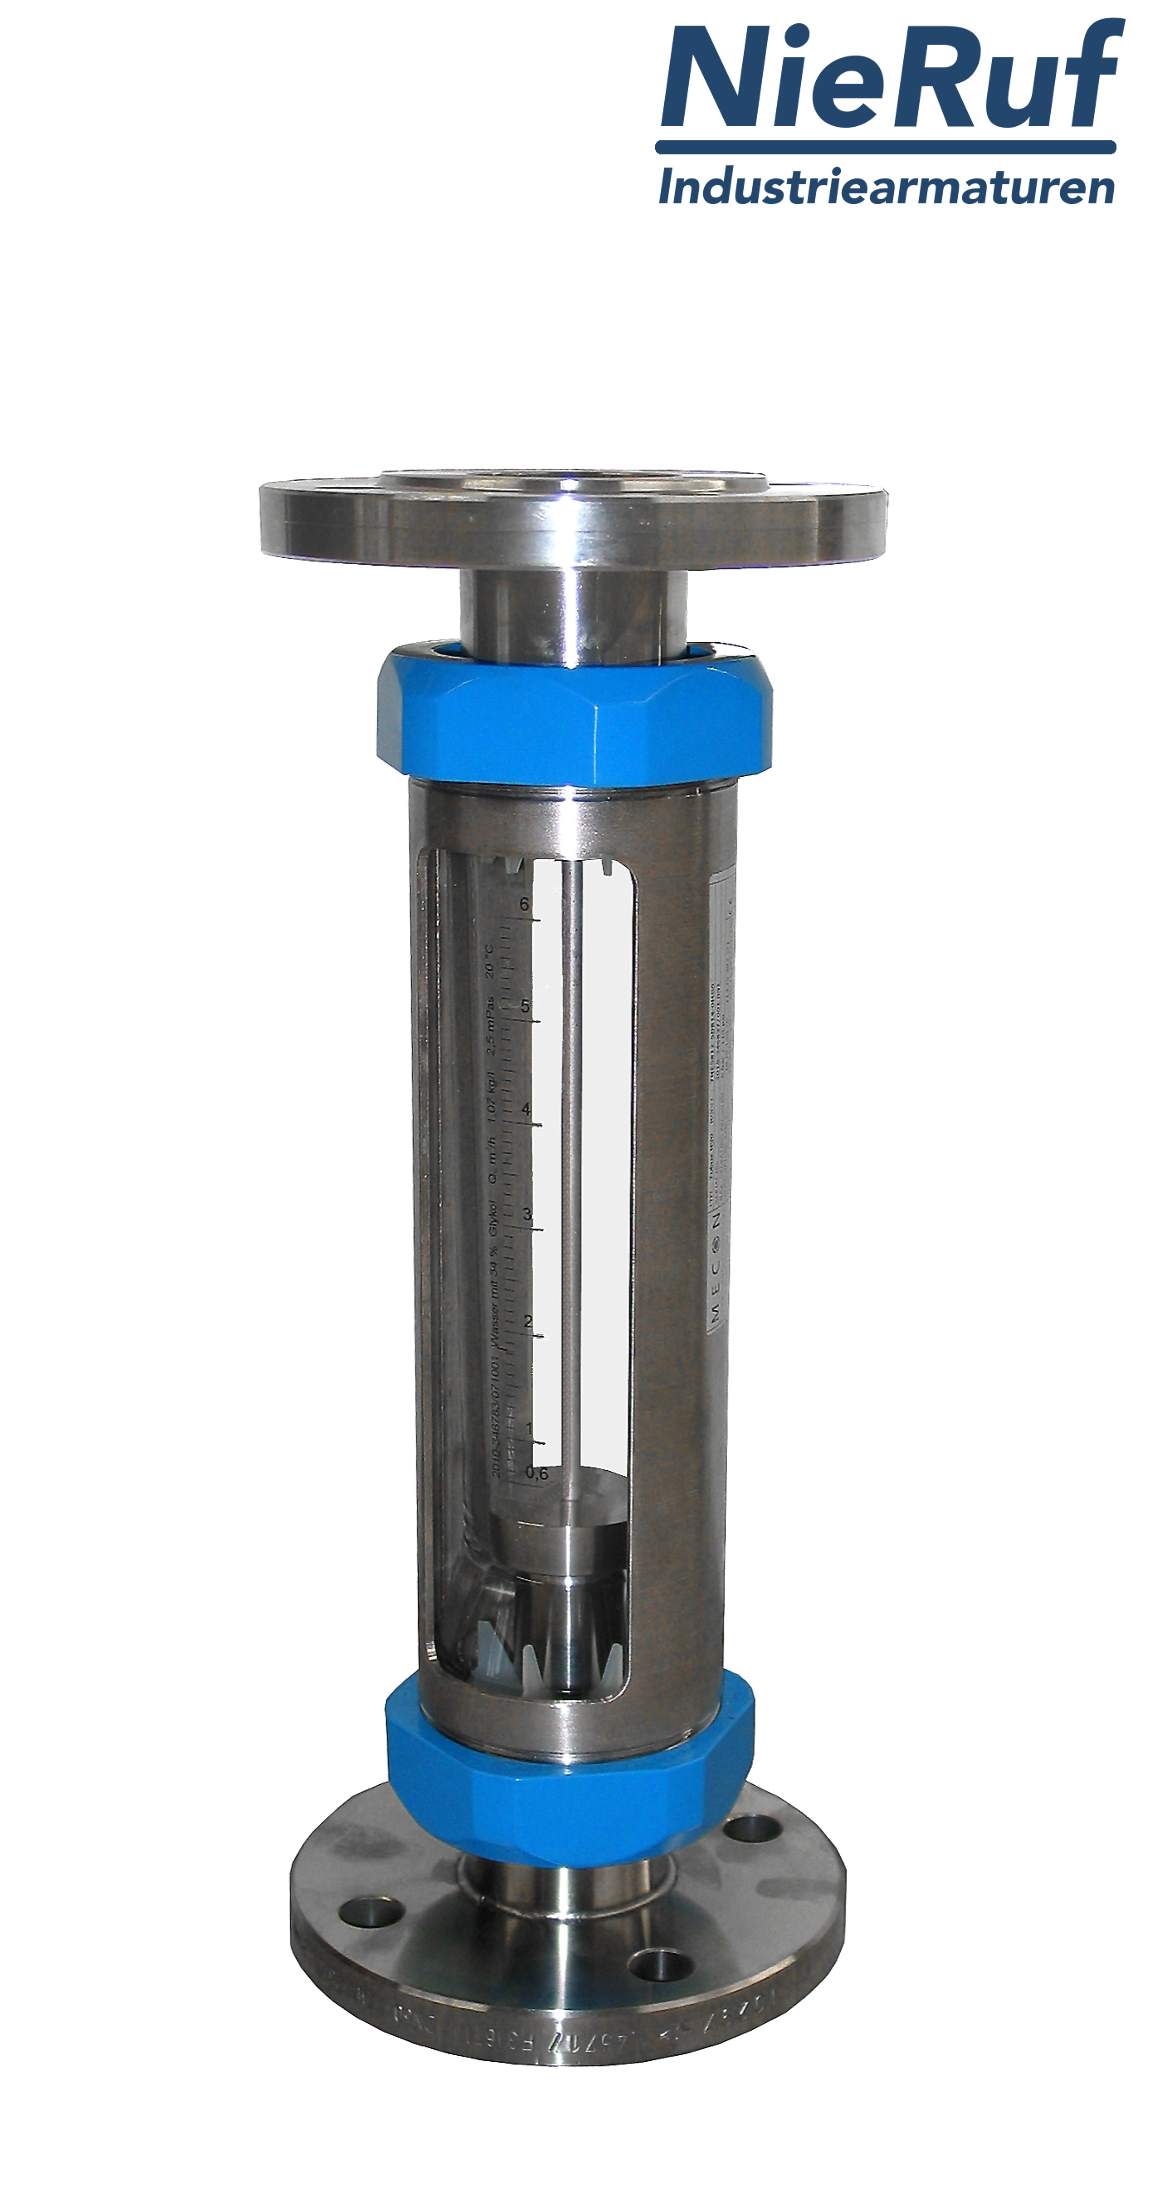 Variable area flowmeter stainless steel + borosilicate flange DN20 25.0 - 250 l/h water FKM